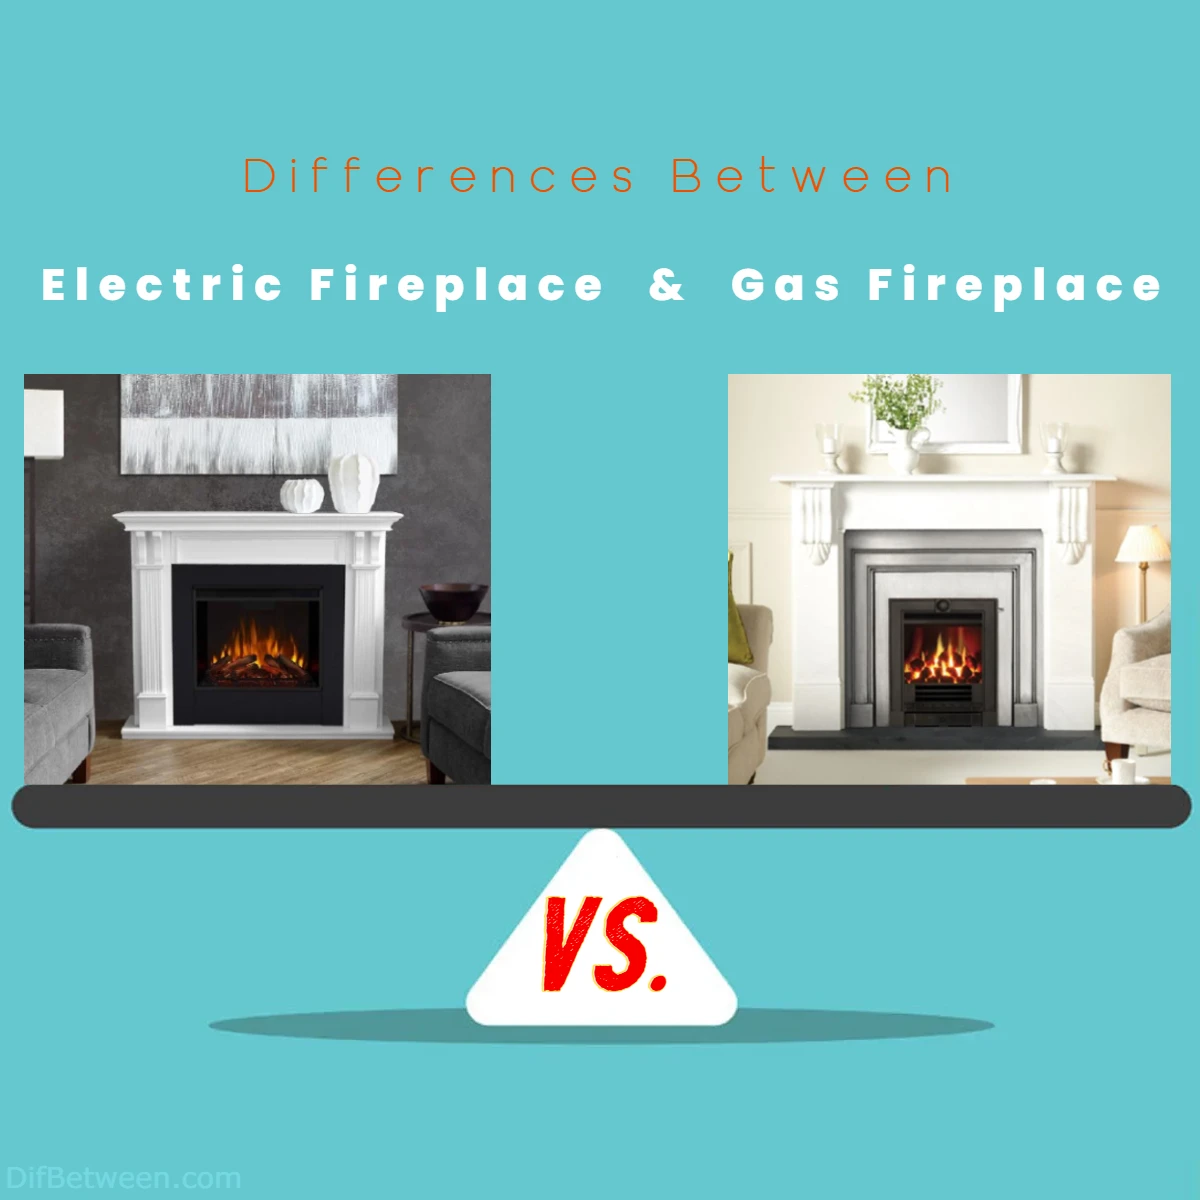 Differences Between Electric Fireplace vs Gas Fireplace